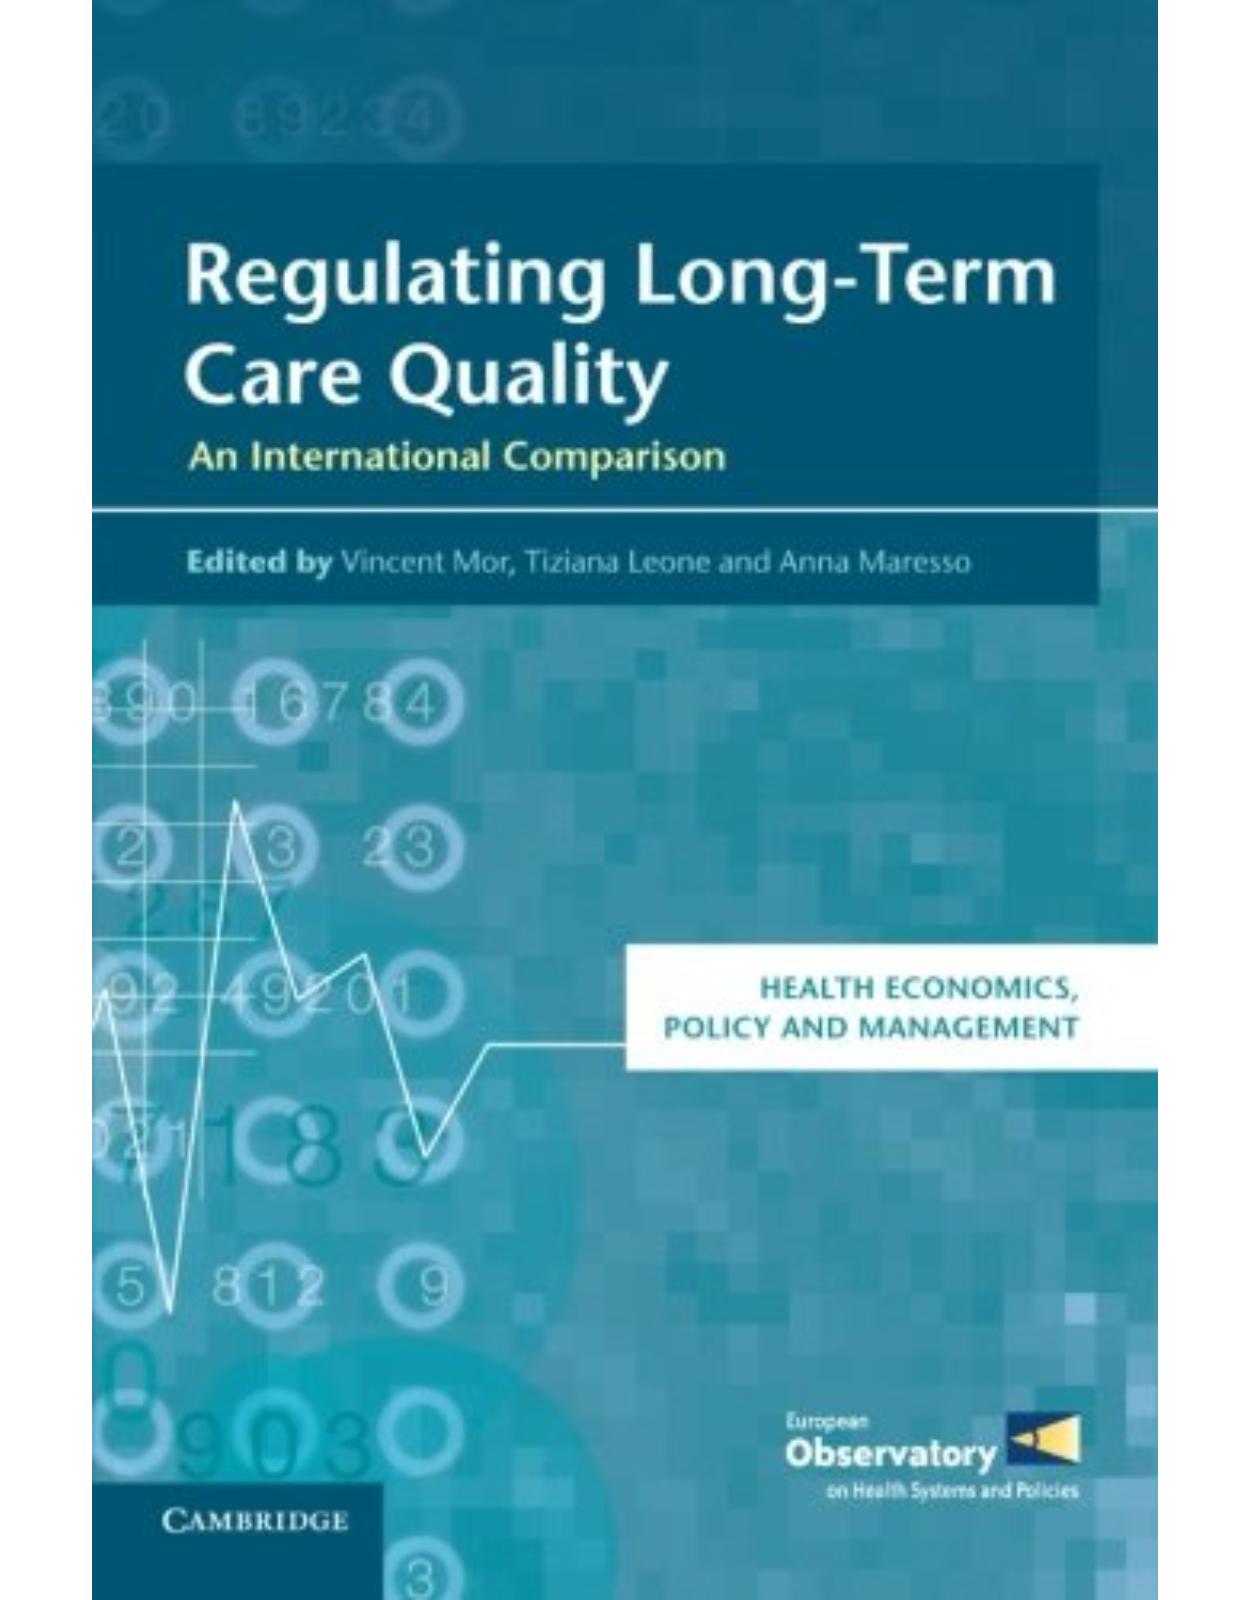 Regulating Long-Term Care Quality: An International Comparison (Health Economics, Policy and Management)